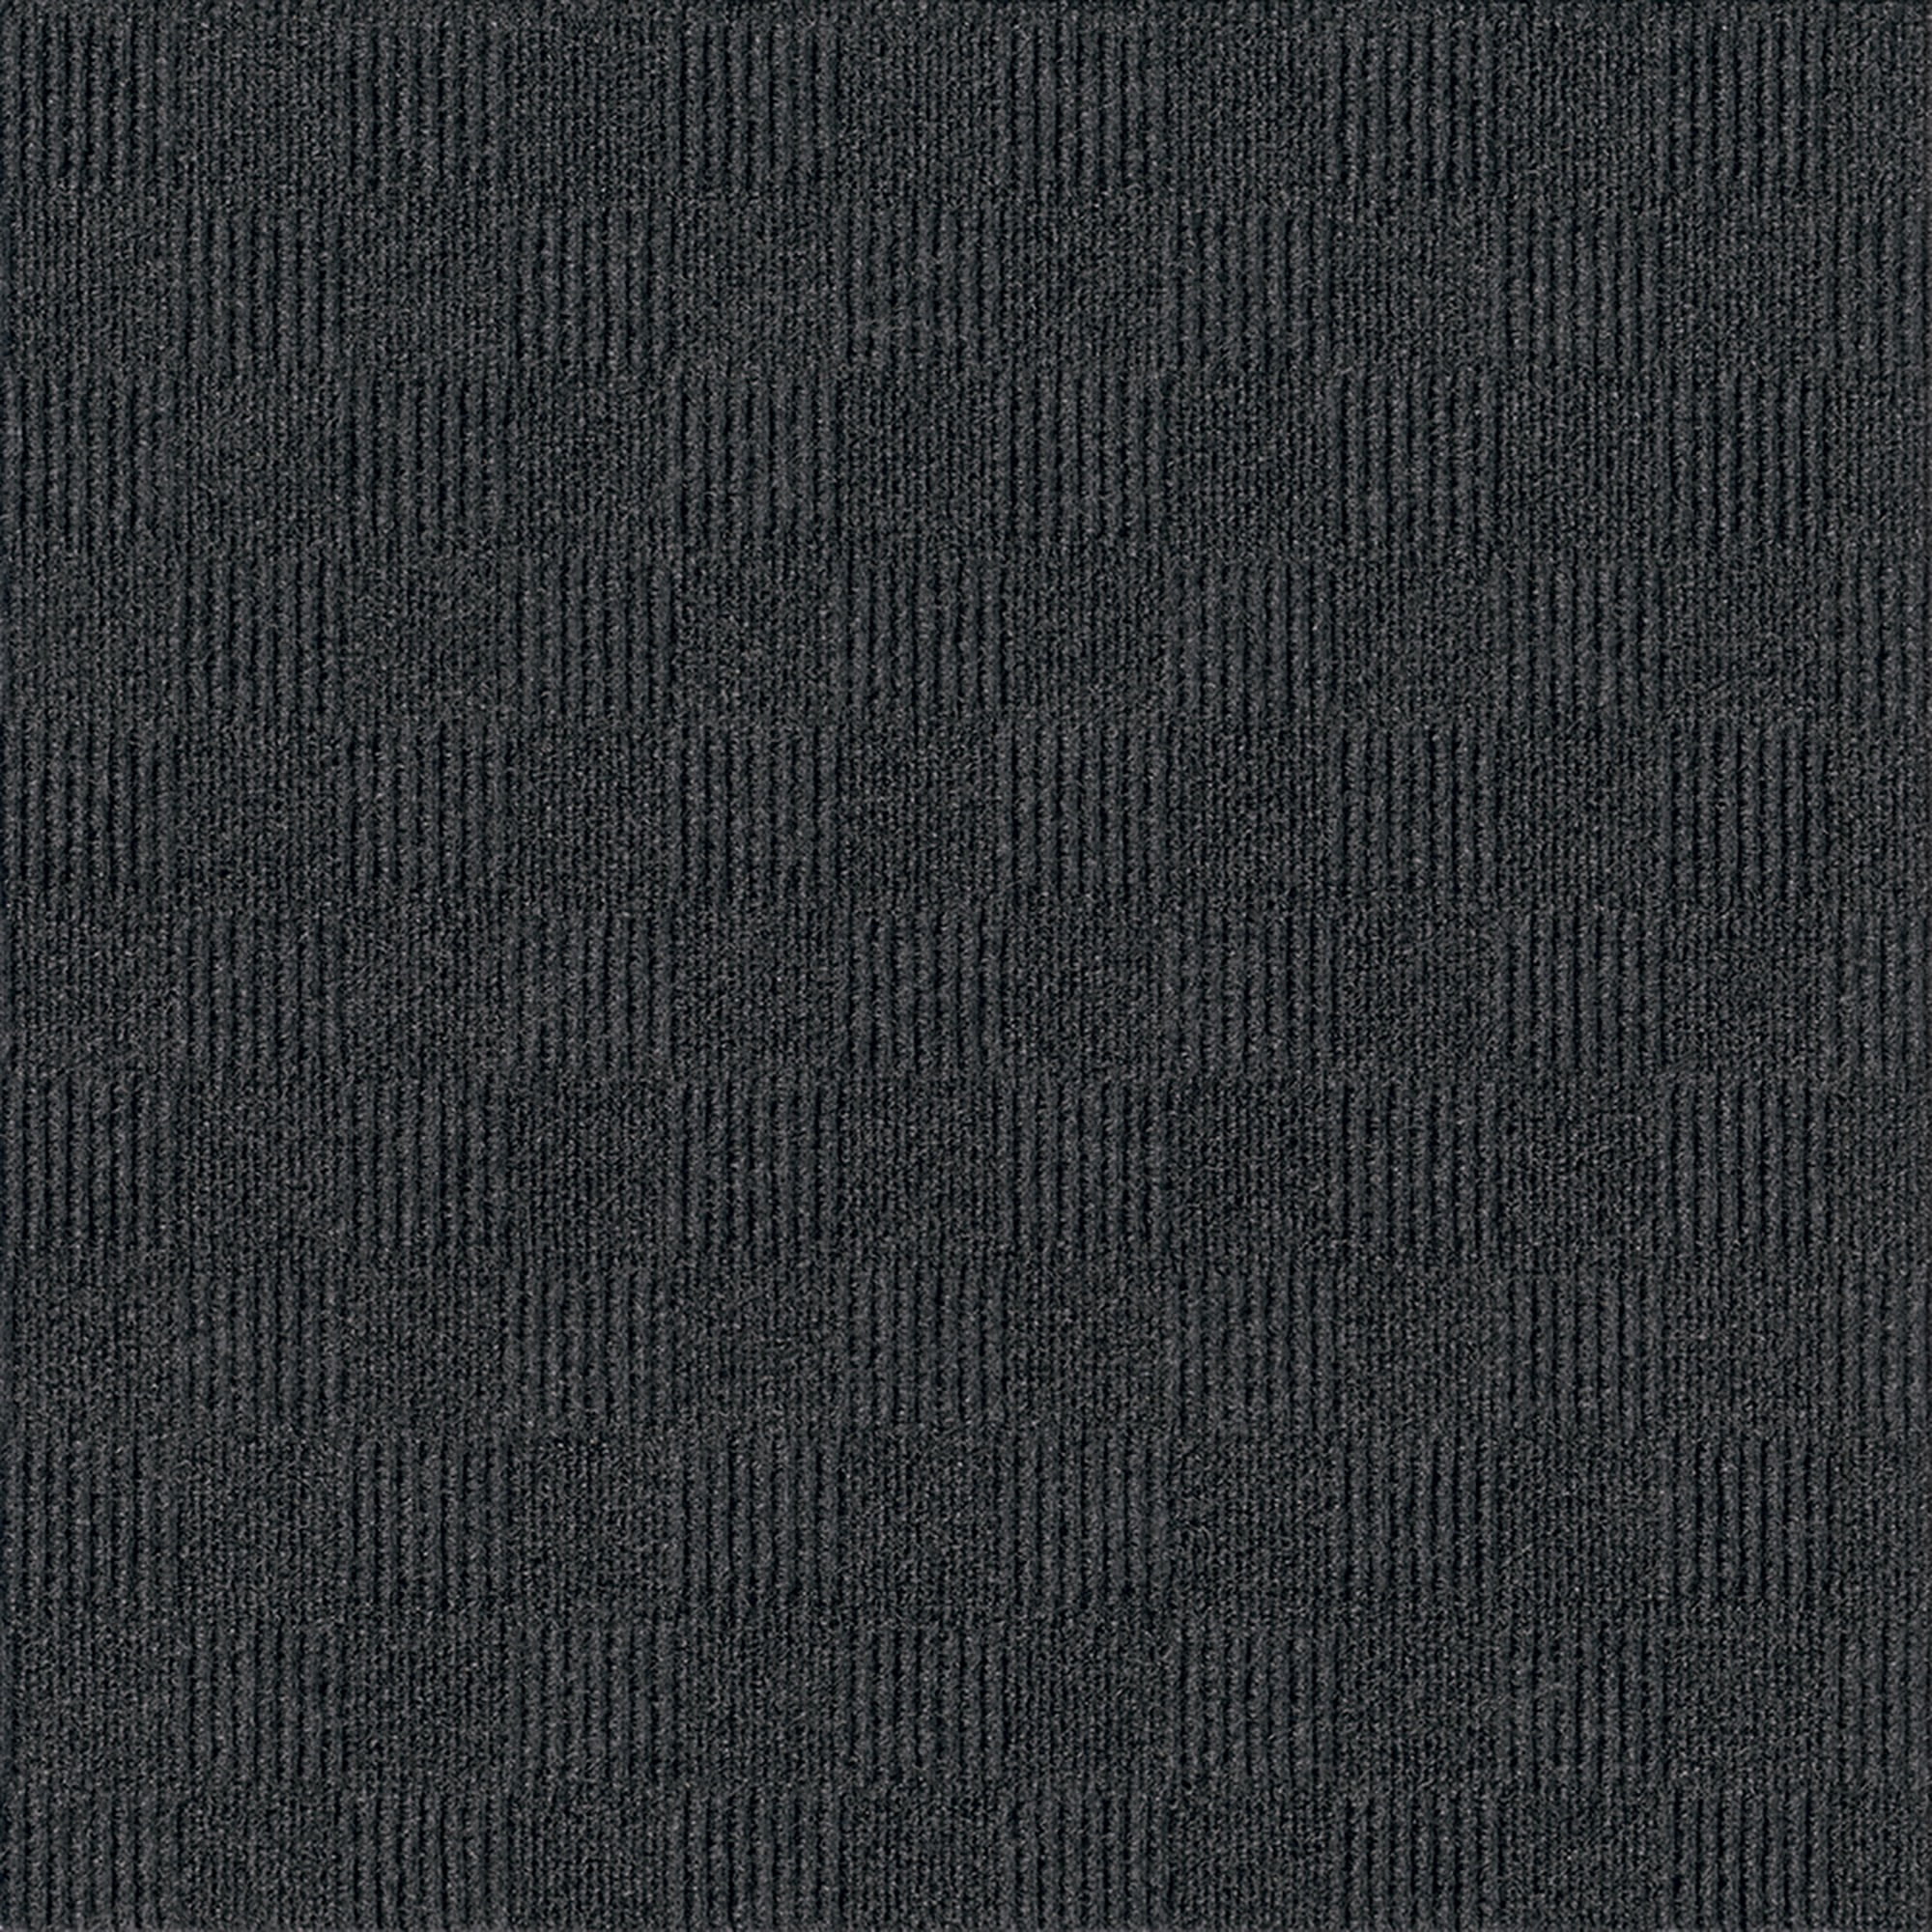 Foss Floors Masonry Black Ice Carpet Tiles 24 X Indoor Outdoor L And Stick 60 Sq Ft Per Box Pack Of 15 Com